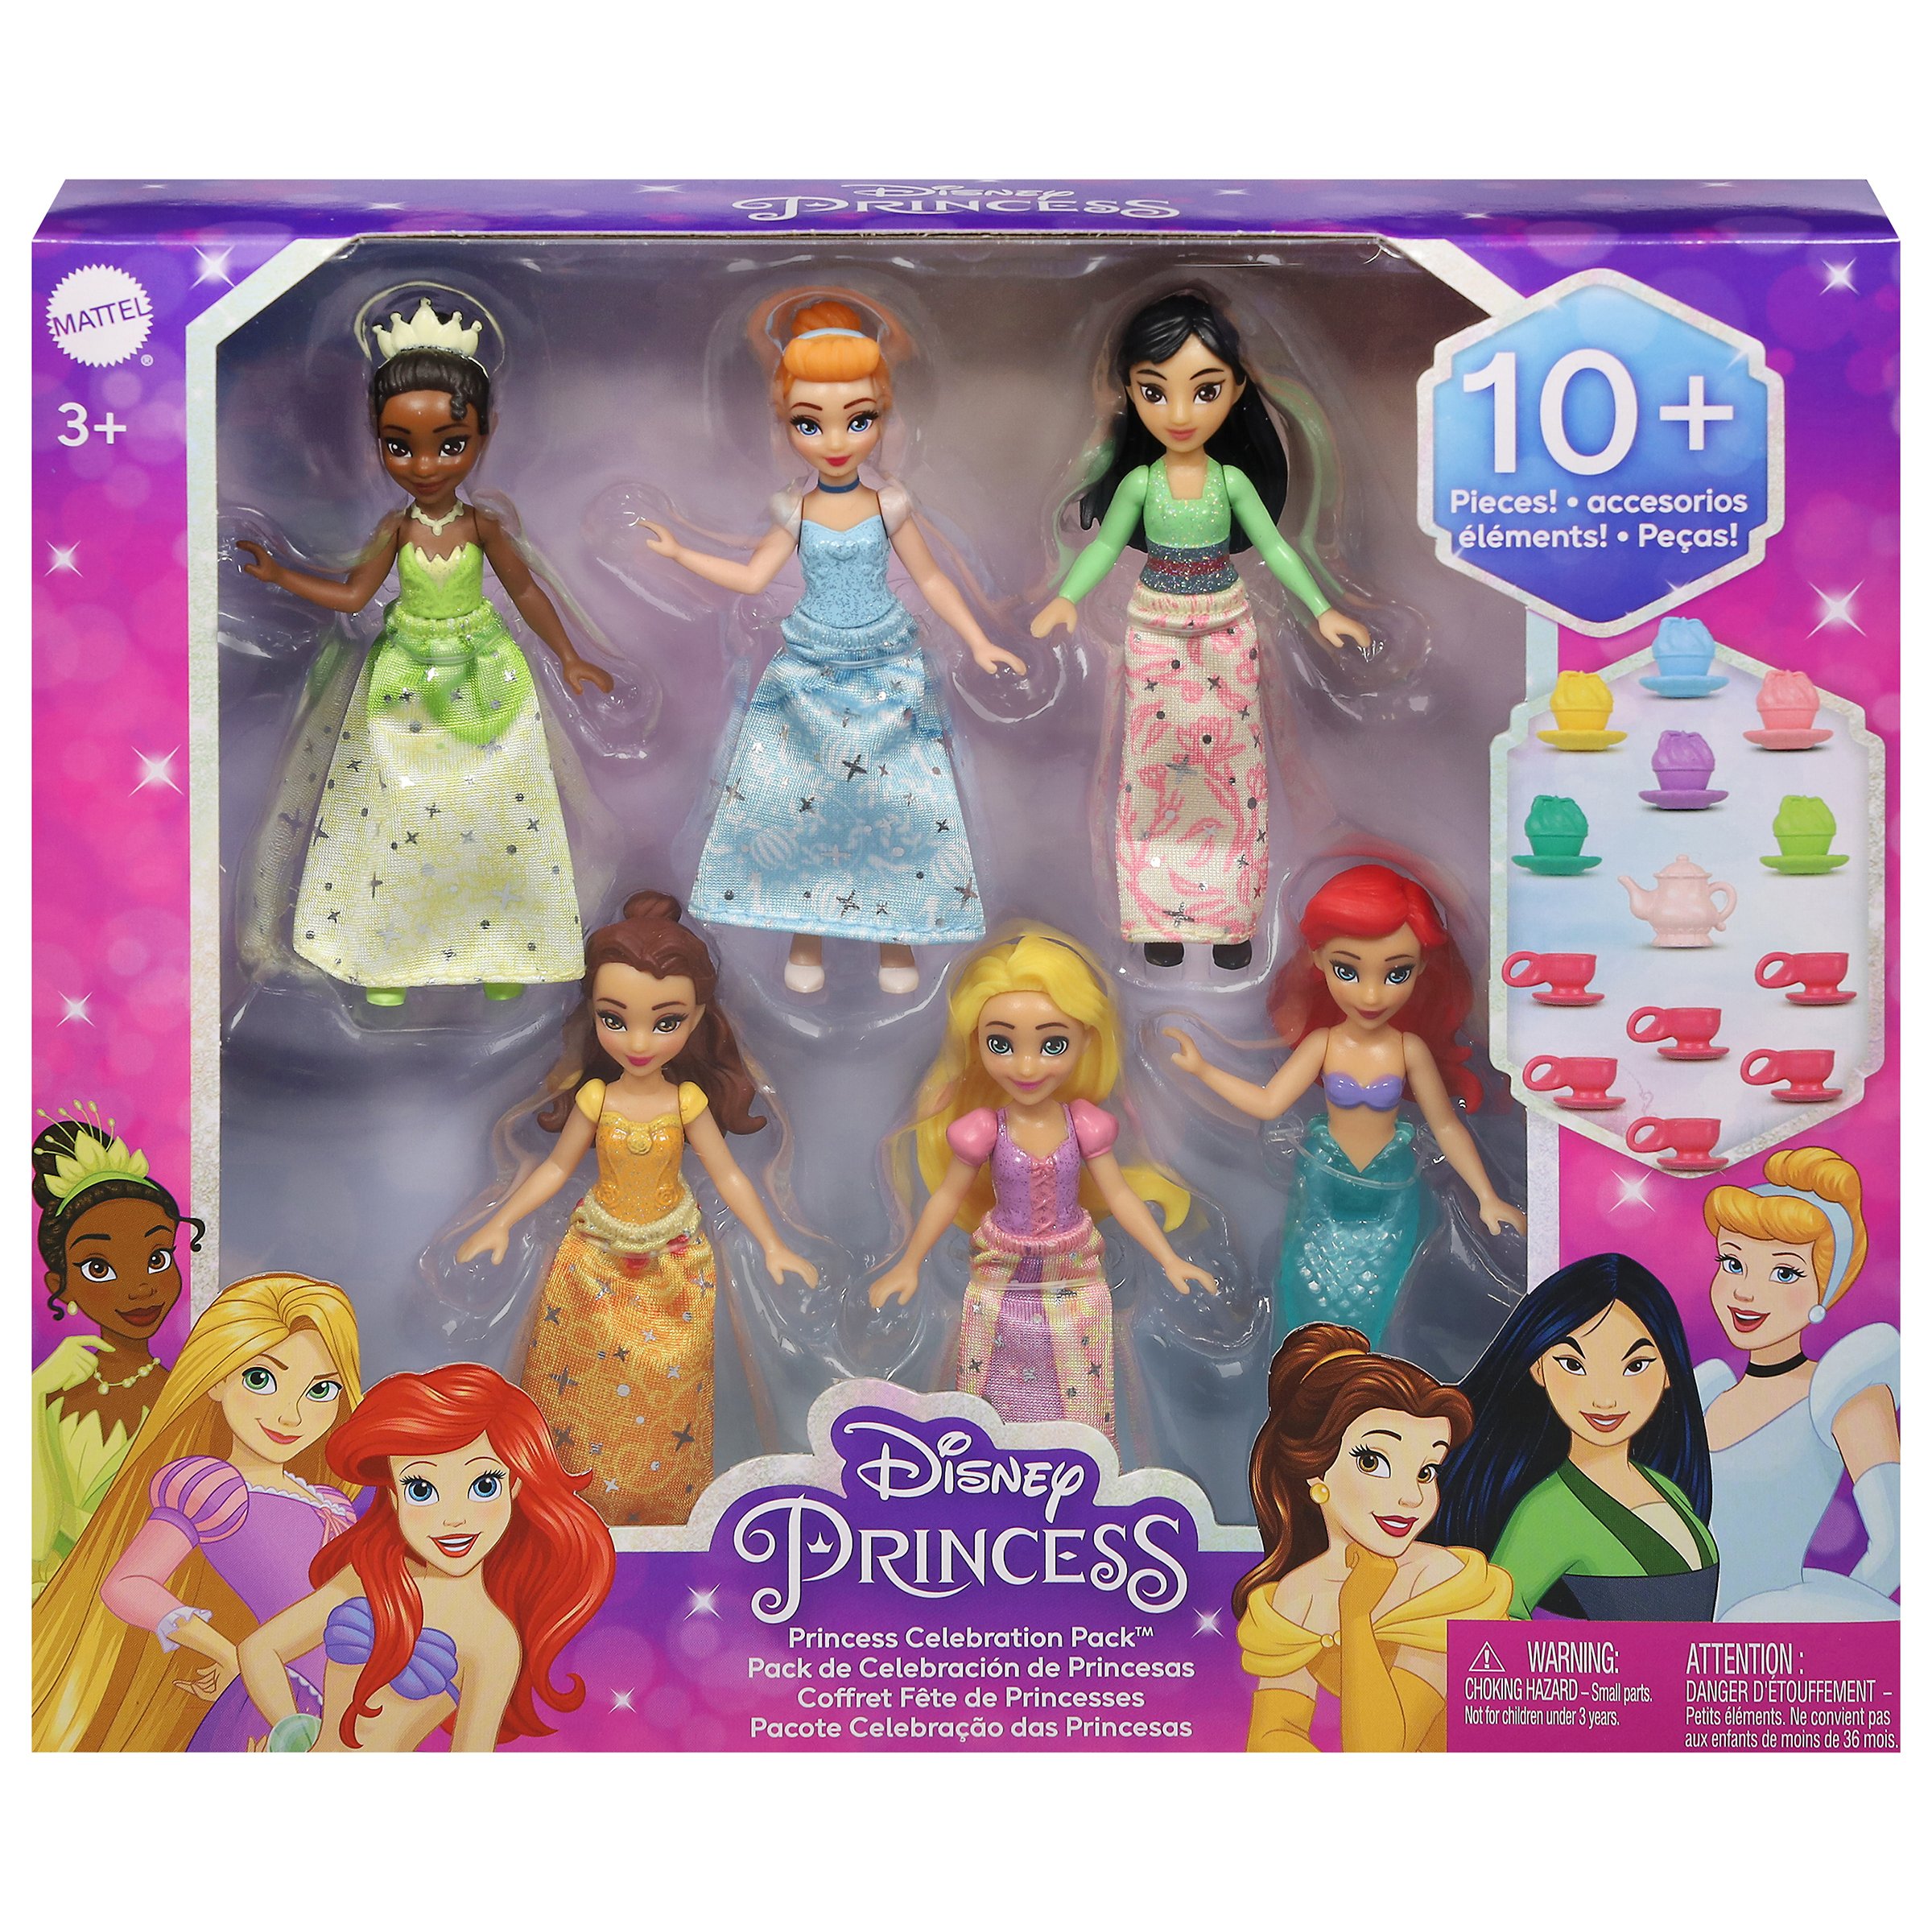 Mattel Disney Princess Toys, 6 Posable Small Dolls with Sparkling Clothing  and 13 Tea Party Accessories Inspired by Disney Movies